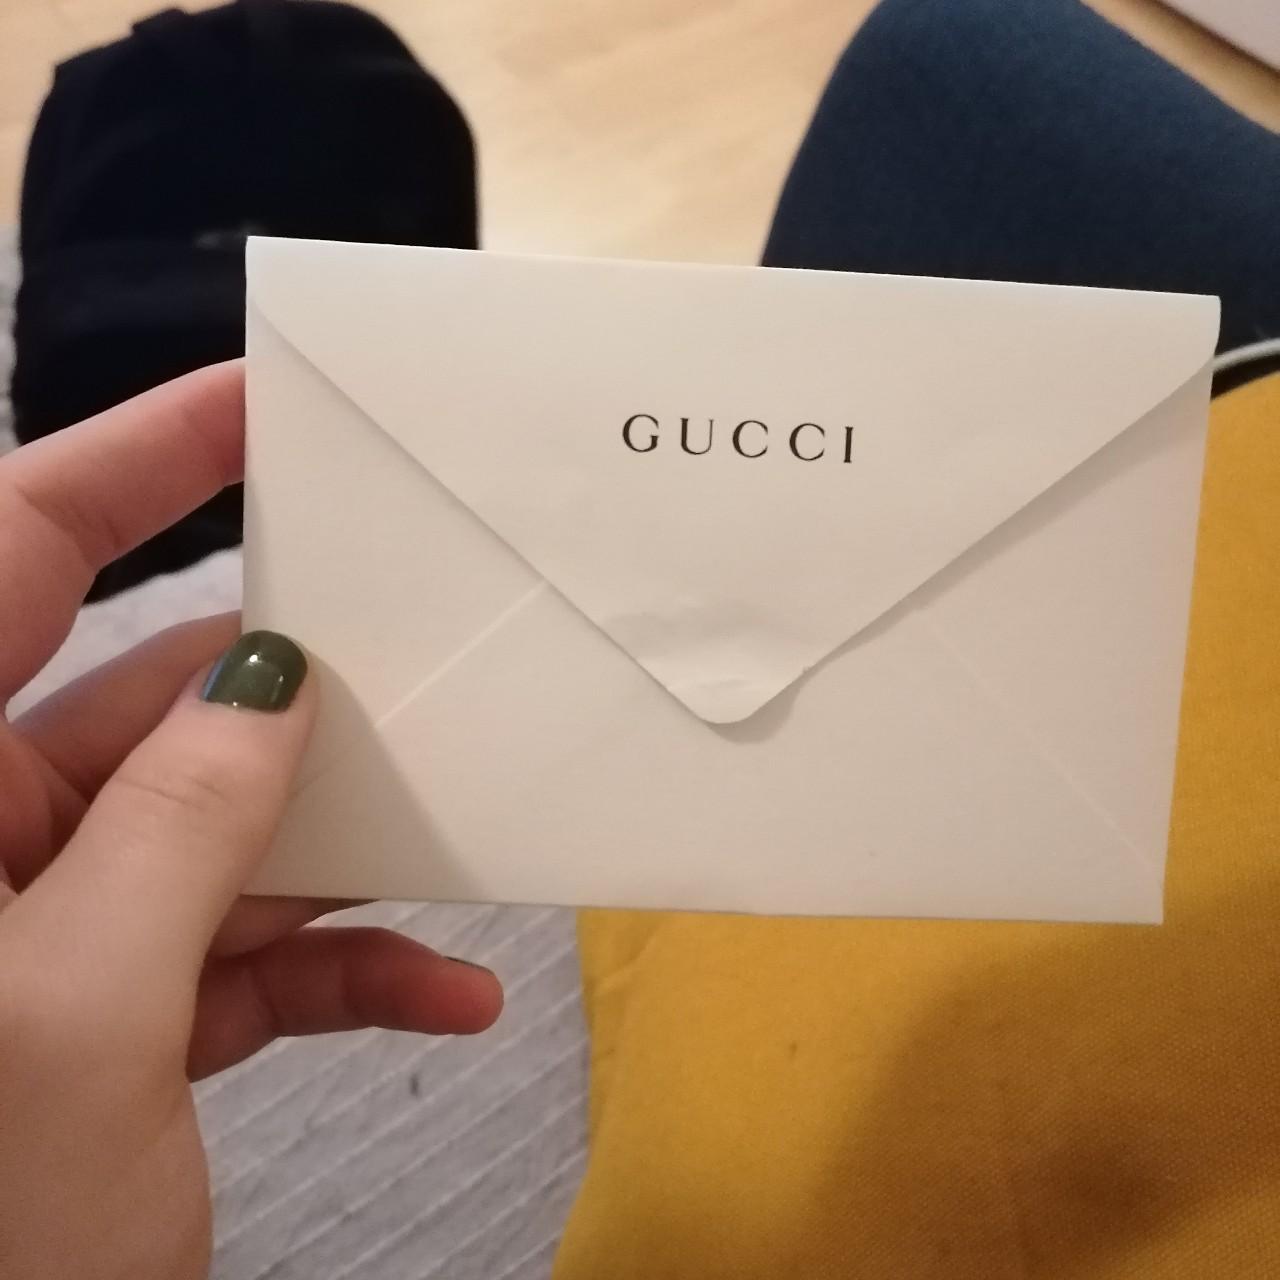 Gucci bag listing 2, Do NOT BUY THIS LISTING, NO REFUND - Depop